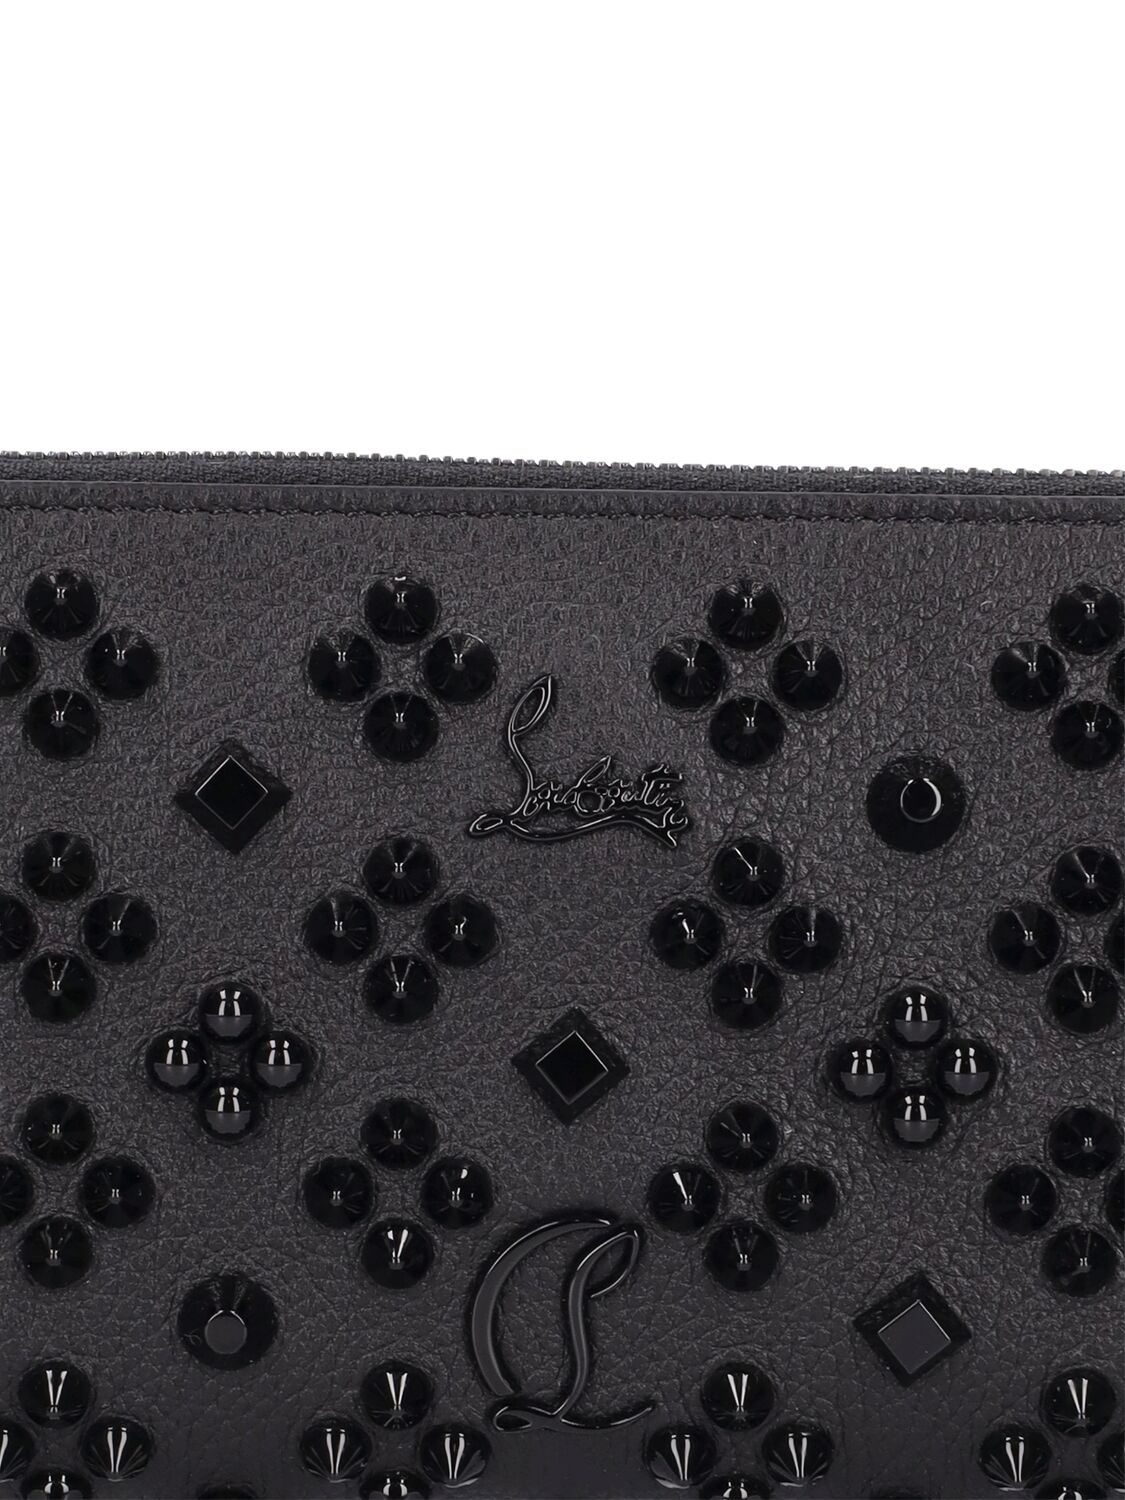 Shop Christian Louboutin Panettone Leather Wallet In Ultrablack